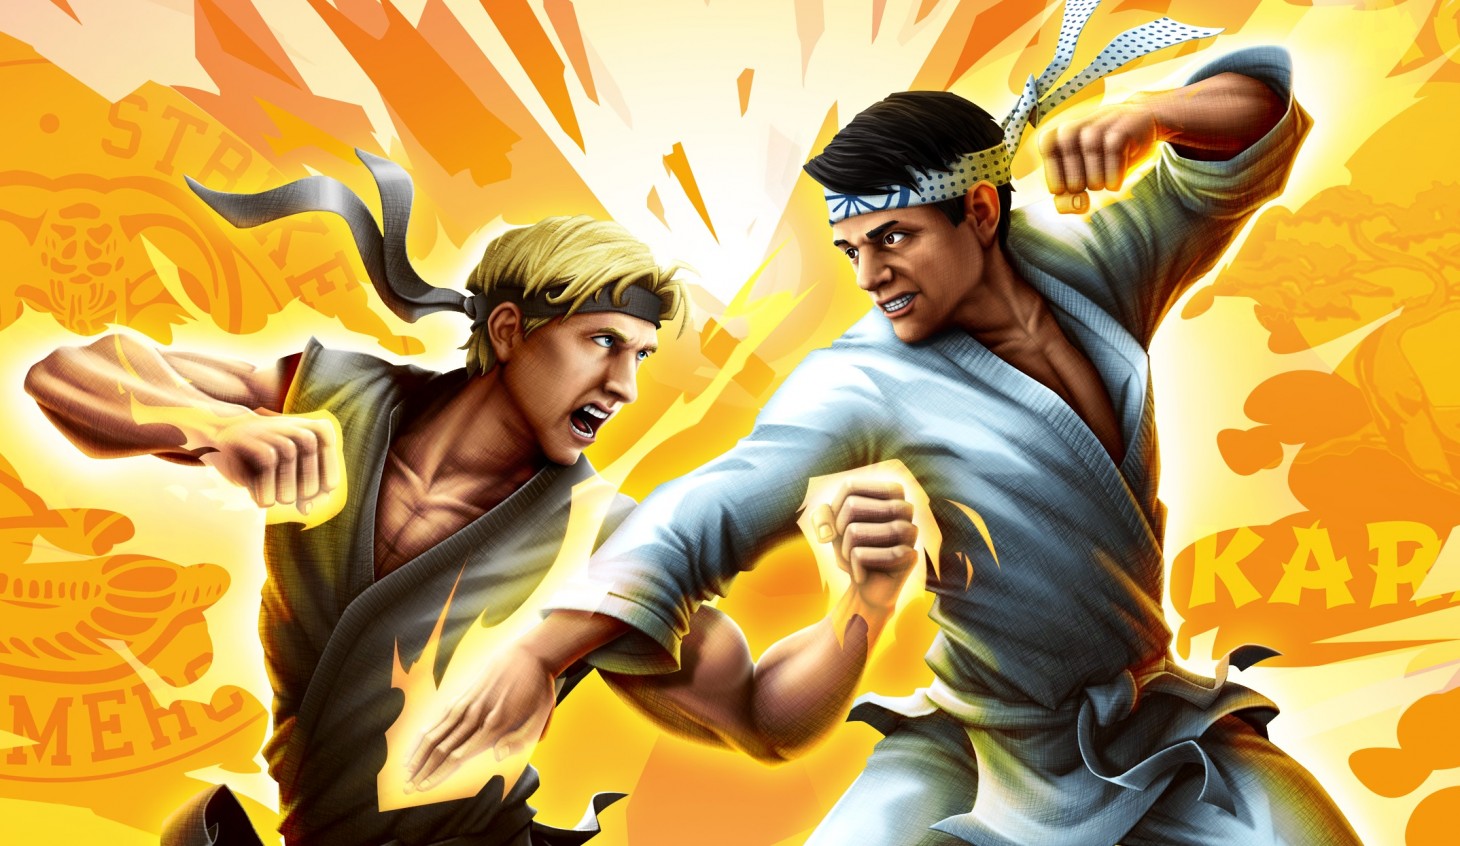 The Cobra Kai Video Game Serves Up '80s Cheese In A Fun Way - Game Informer